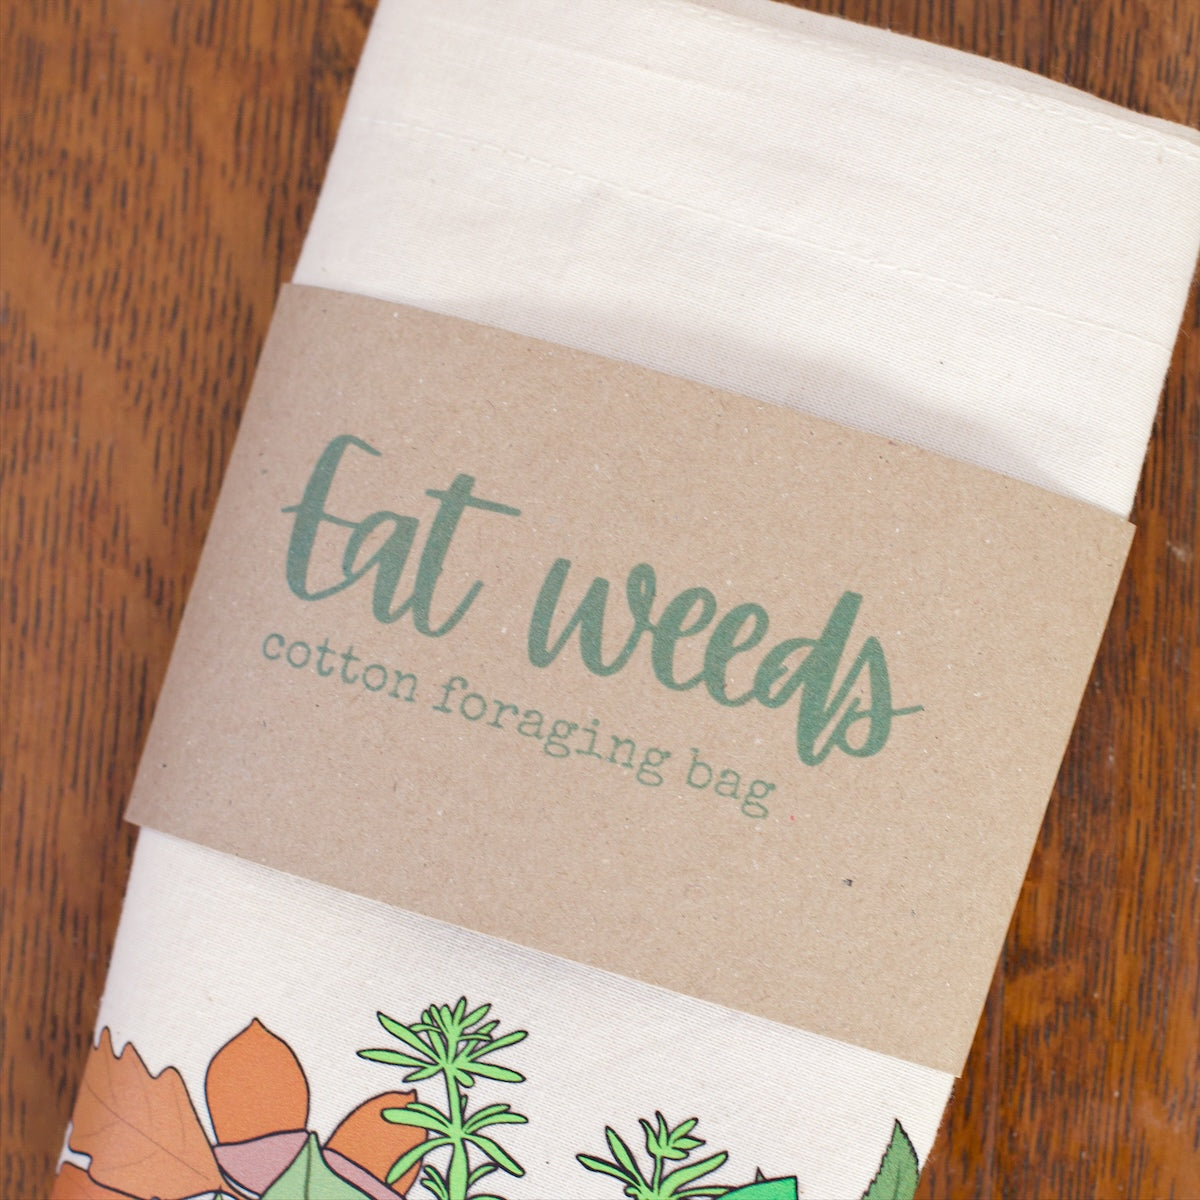 ‘I Eat Weeds’ Foraging Bag and Leather Buckle